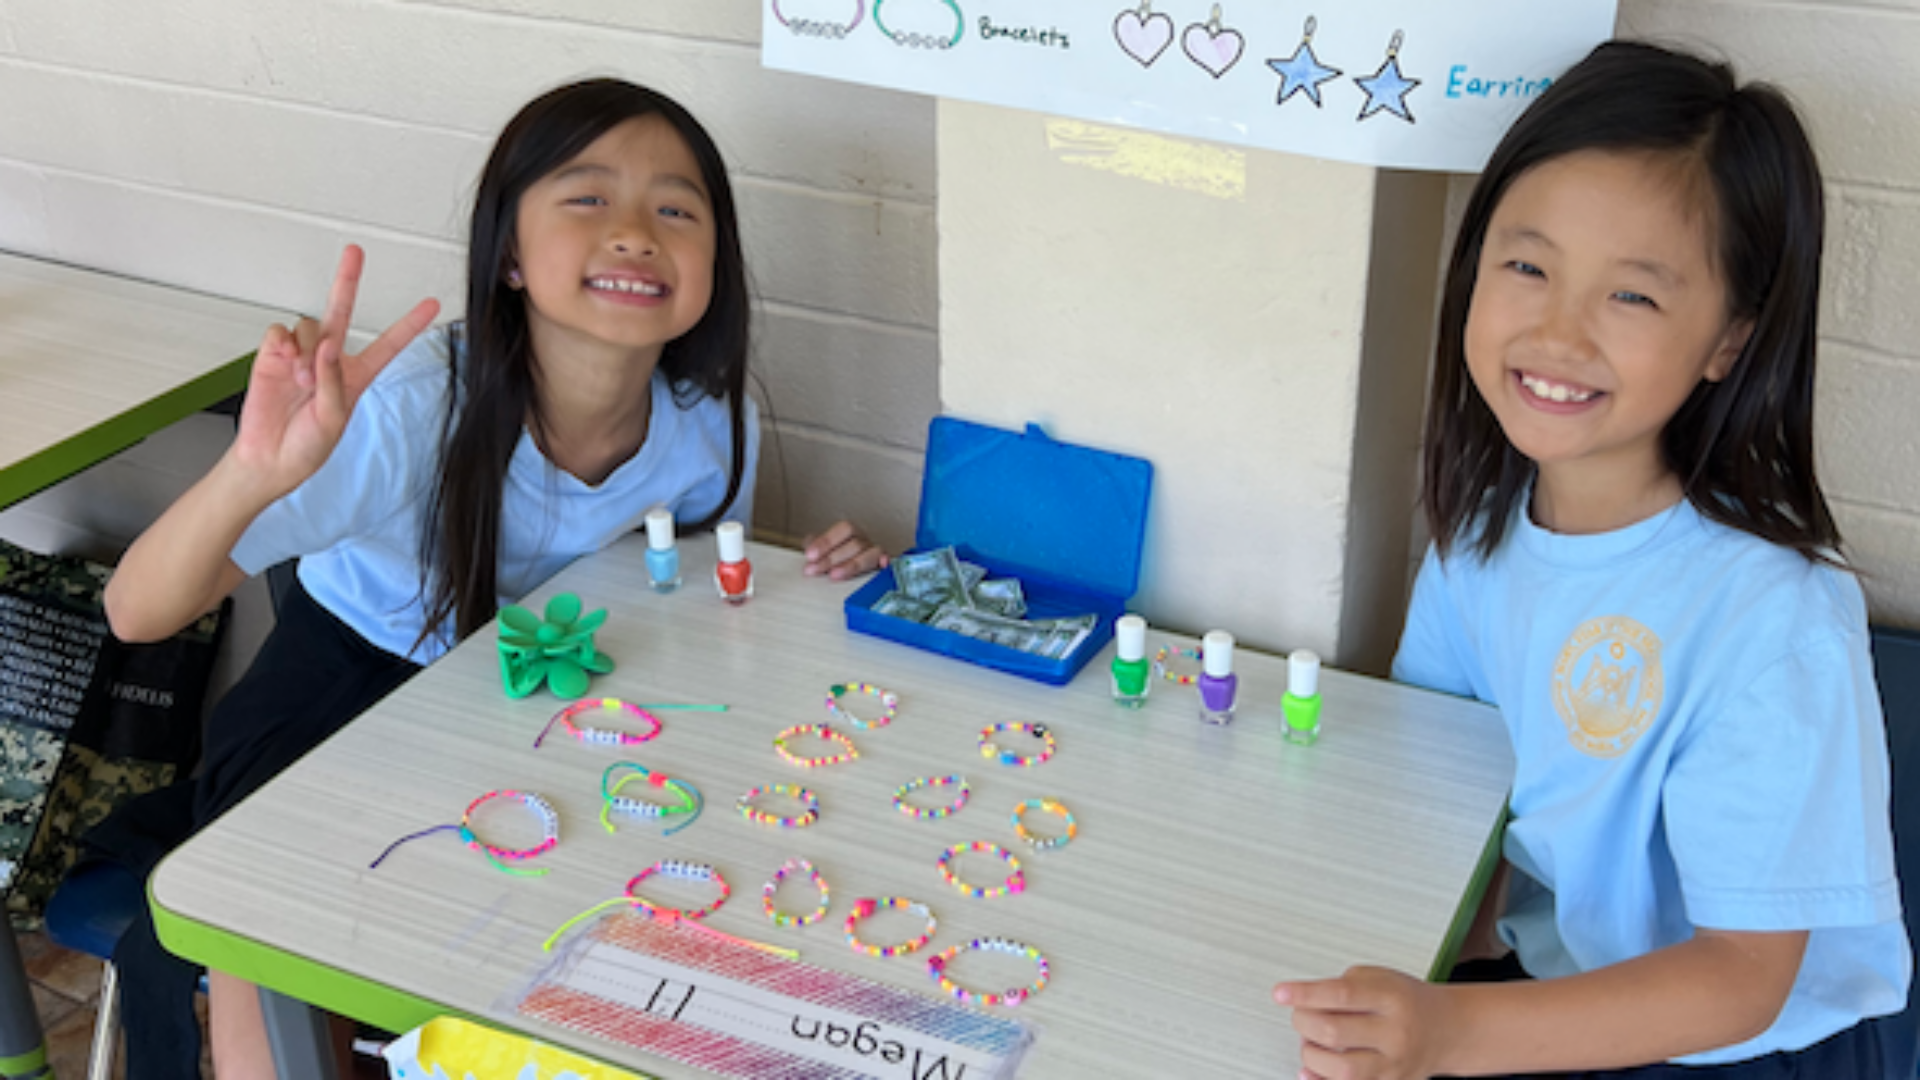 Grade 2 Market Day: A Fun and Educational Experience